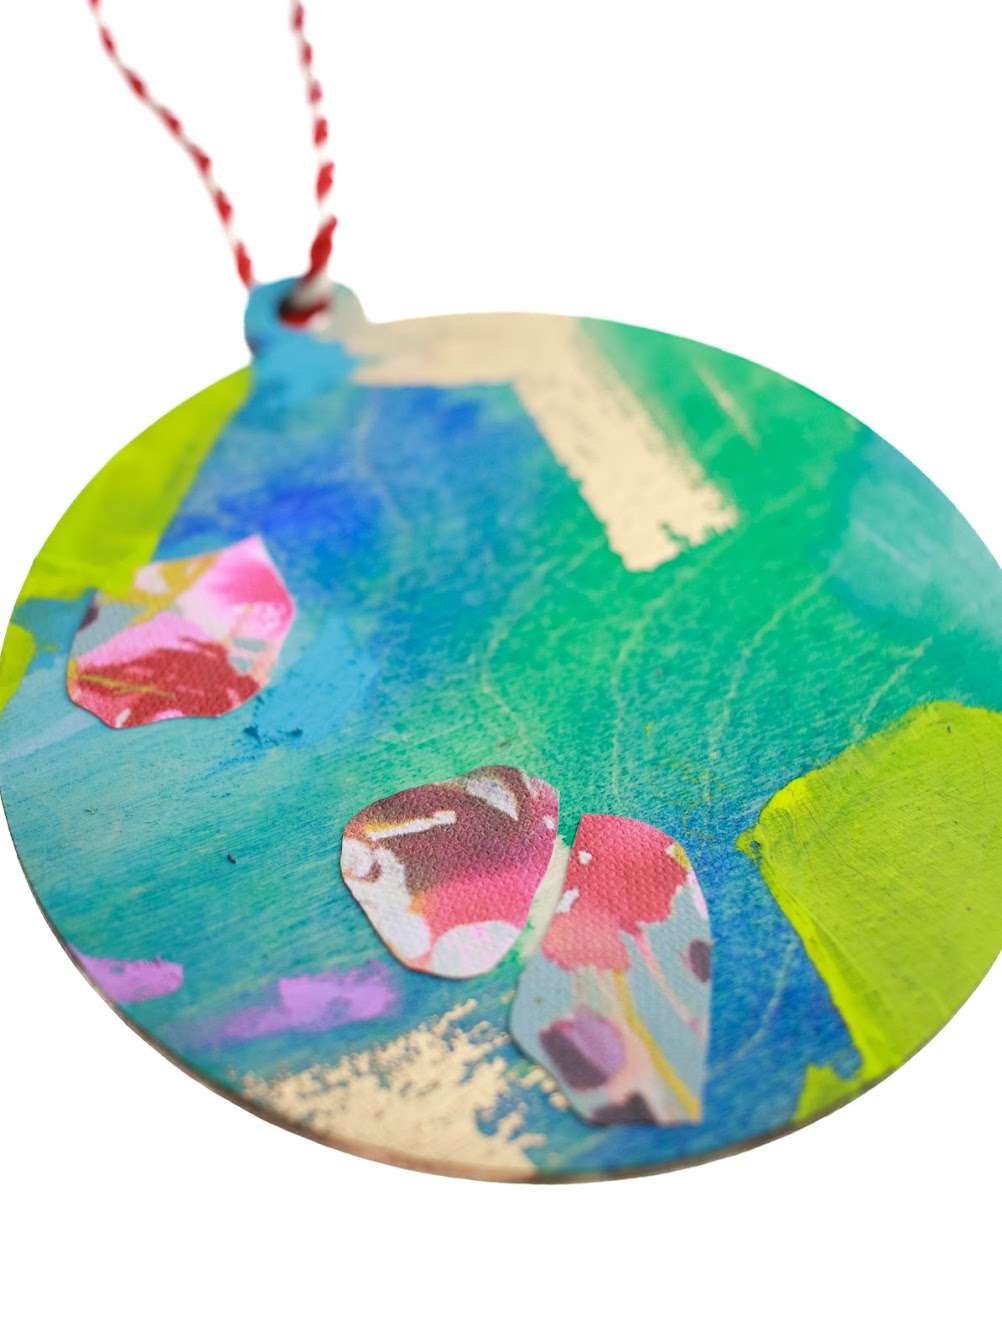 "Keep the change, ya filthy animal" Hand-Painted Round Wooden Ornament No. 1